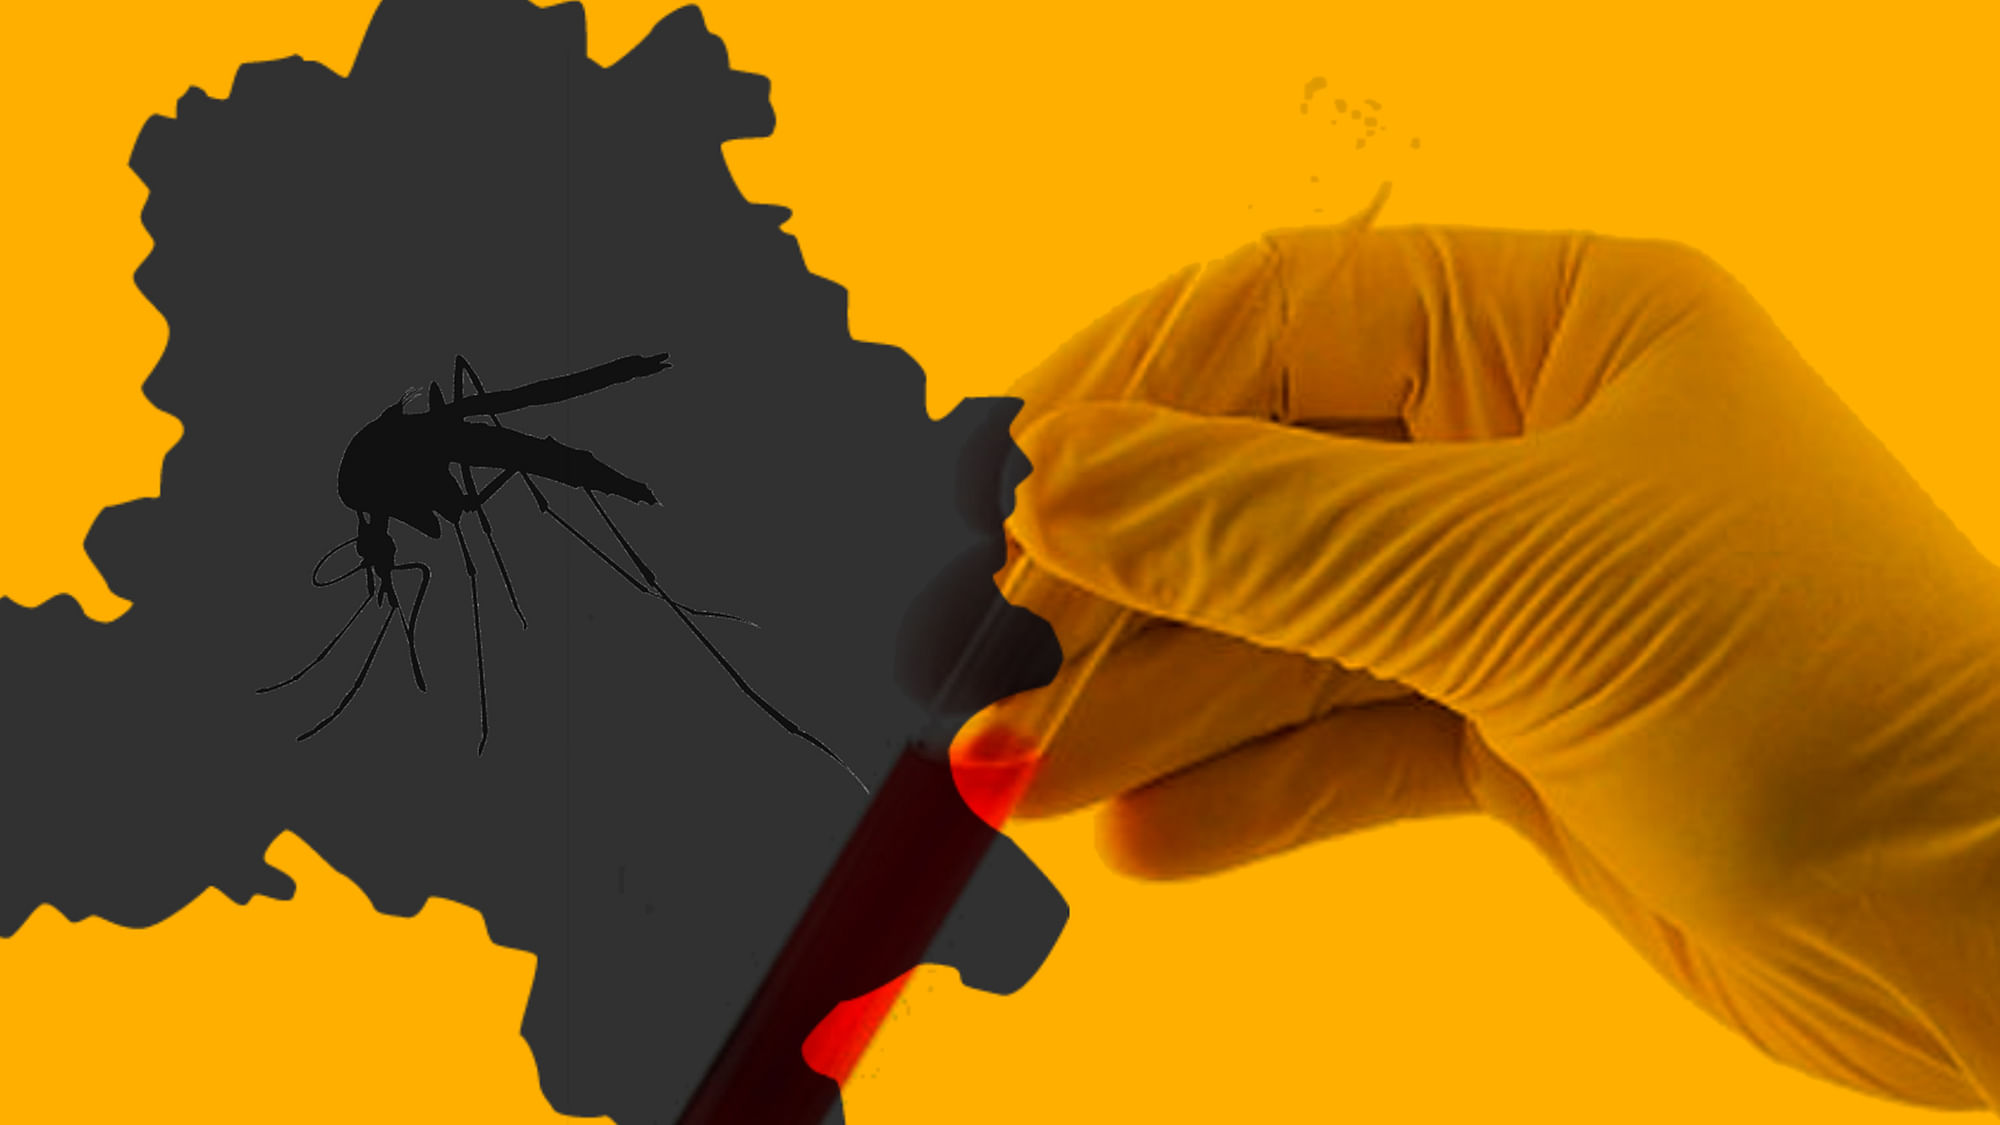 From sporadic cases of dengue in 1960s to widespread outbreak now – the scale of mosquito-borne diseases appears to be growing every year. (Photo: <b>The Quint</b>)